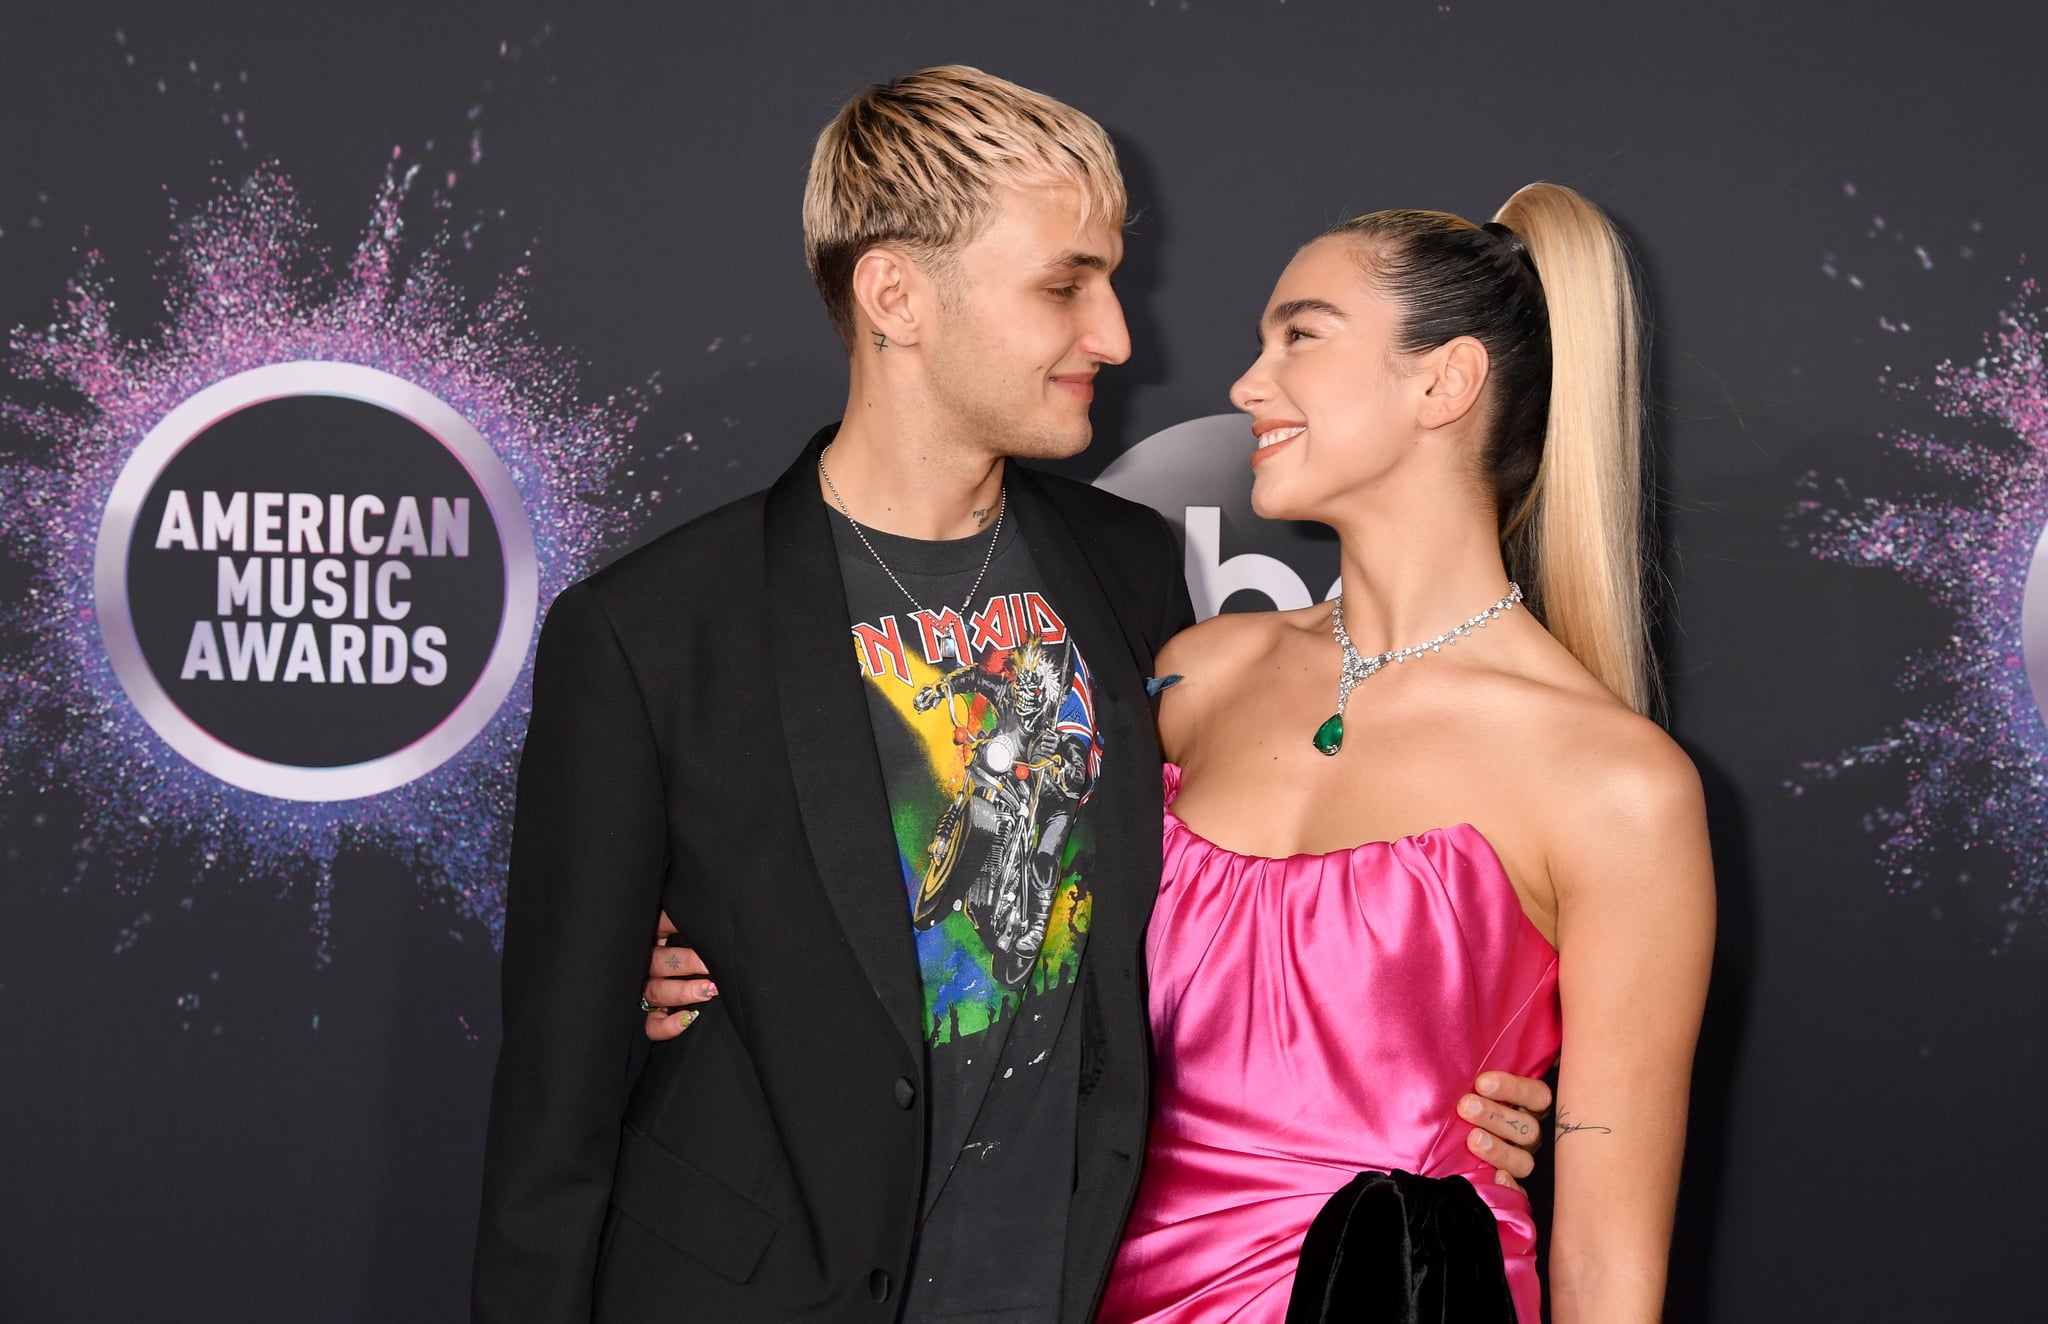 LOS ANGELES, CALIFORNIA - NOVEMBER 24: (L-R) Anwar Hadid and Dua Lipa attend the 2019 American Music Awards at Microsoft Theatre on November 24, 2019 in Los Angeles, California. (Photo by Jeff Kravitz/FilmMagic for dcp)